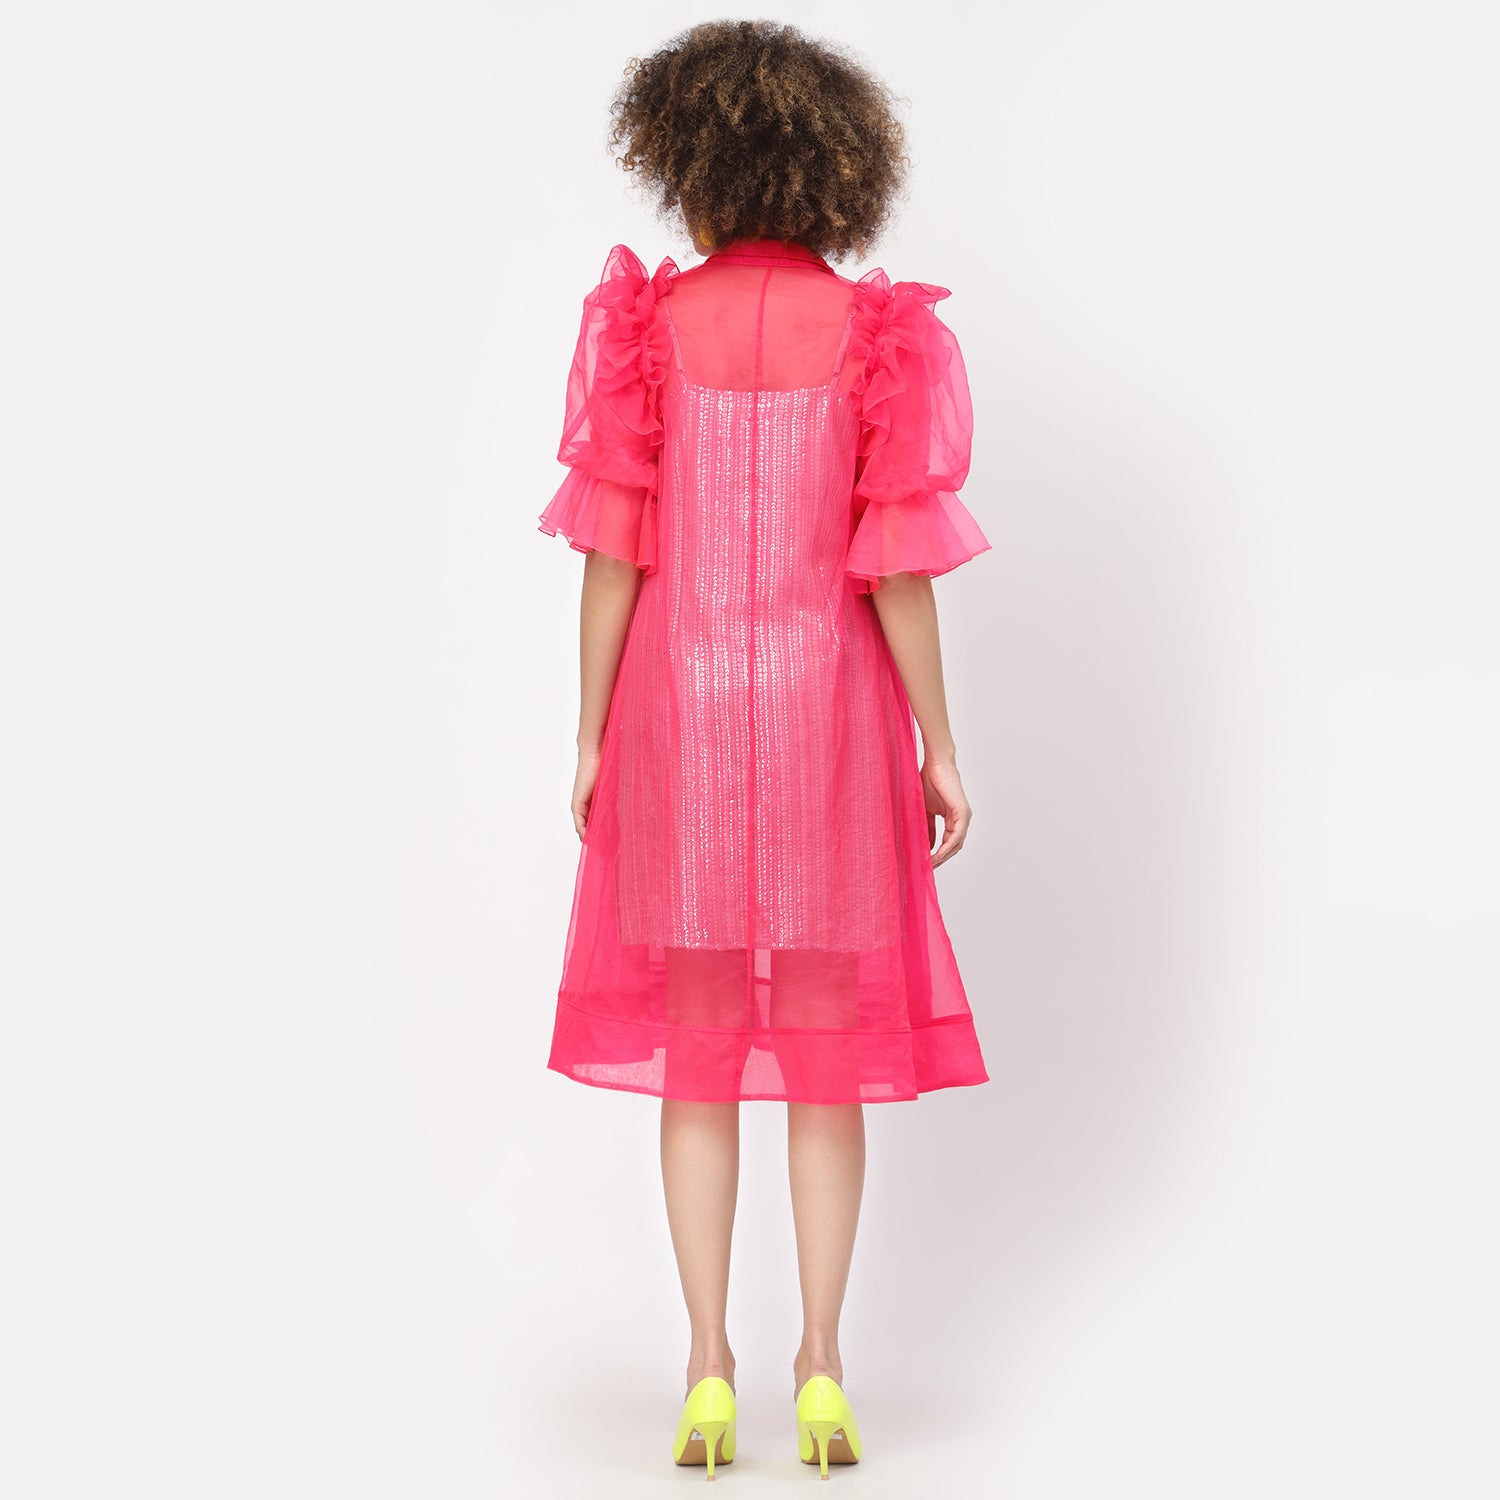 Neon Pink Organza Jacket With Puff Sleeves